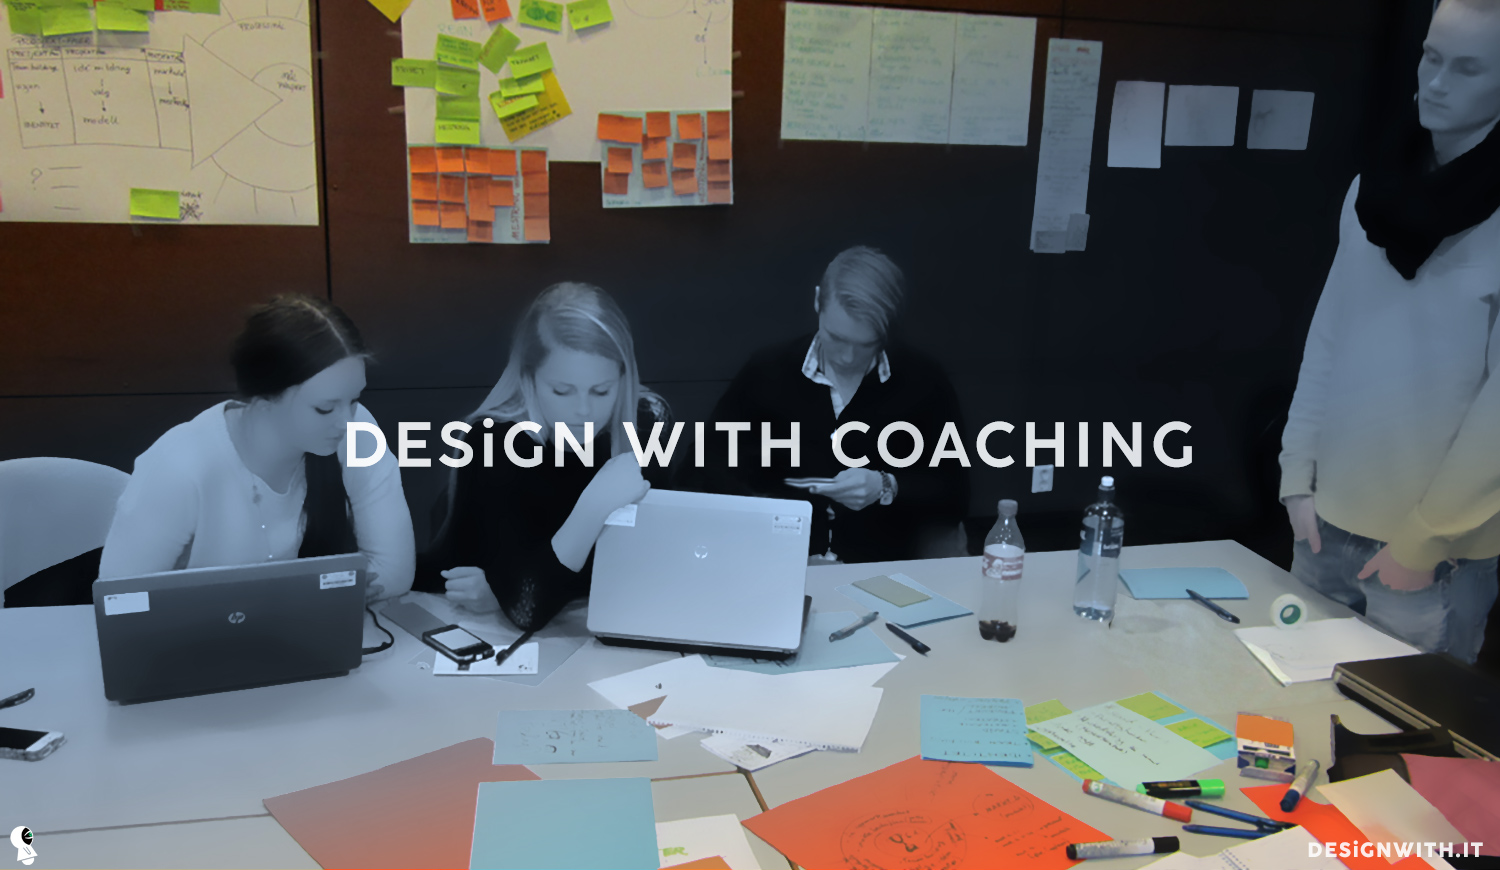 Design with coaching. Design with it!